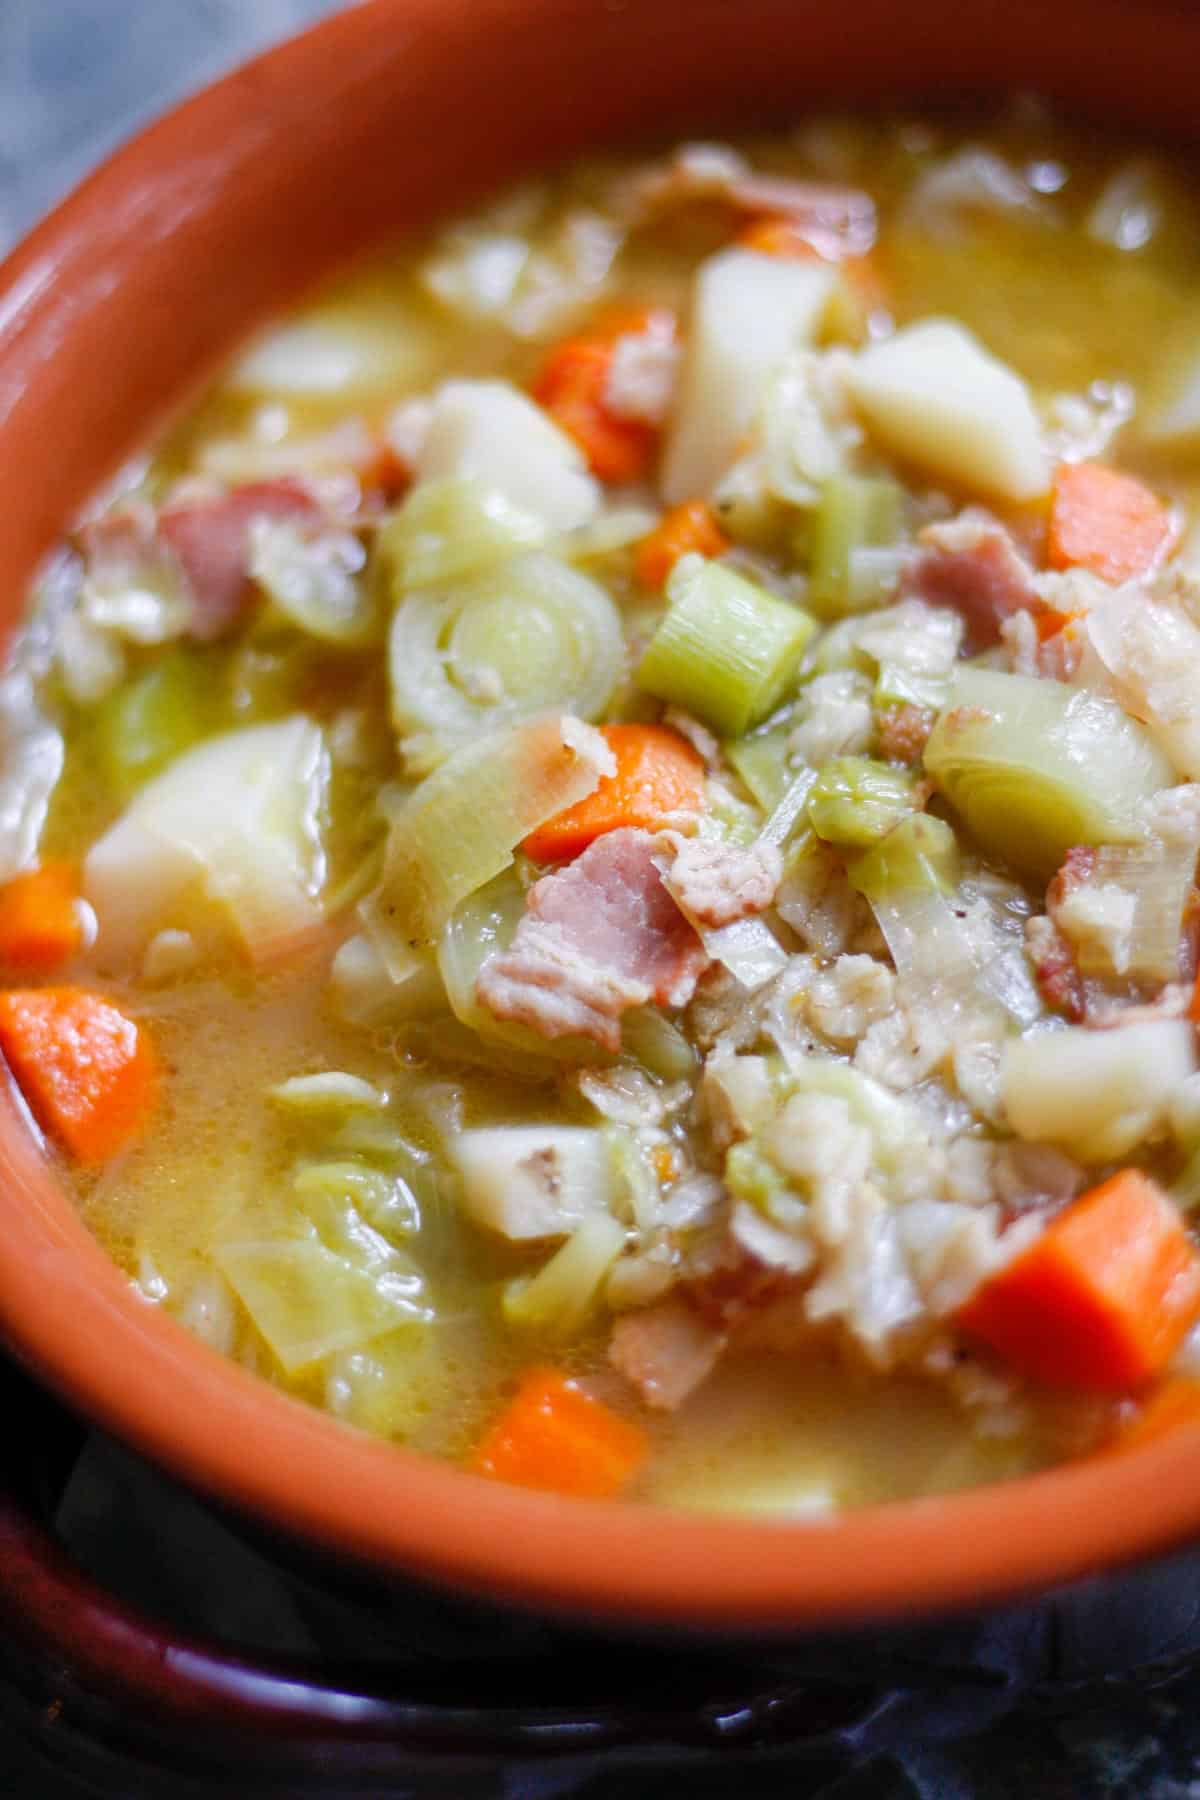 A terracotta soup bowl full of soup consisting of chicken broth, bacon, leeks, carrots, cabbage and potatoes.